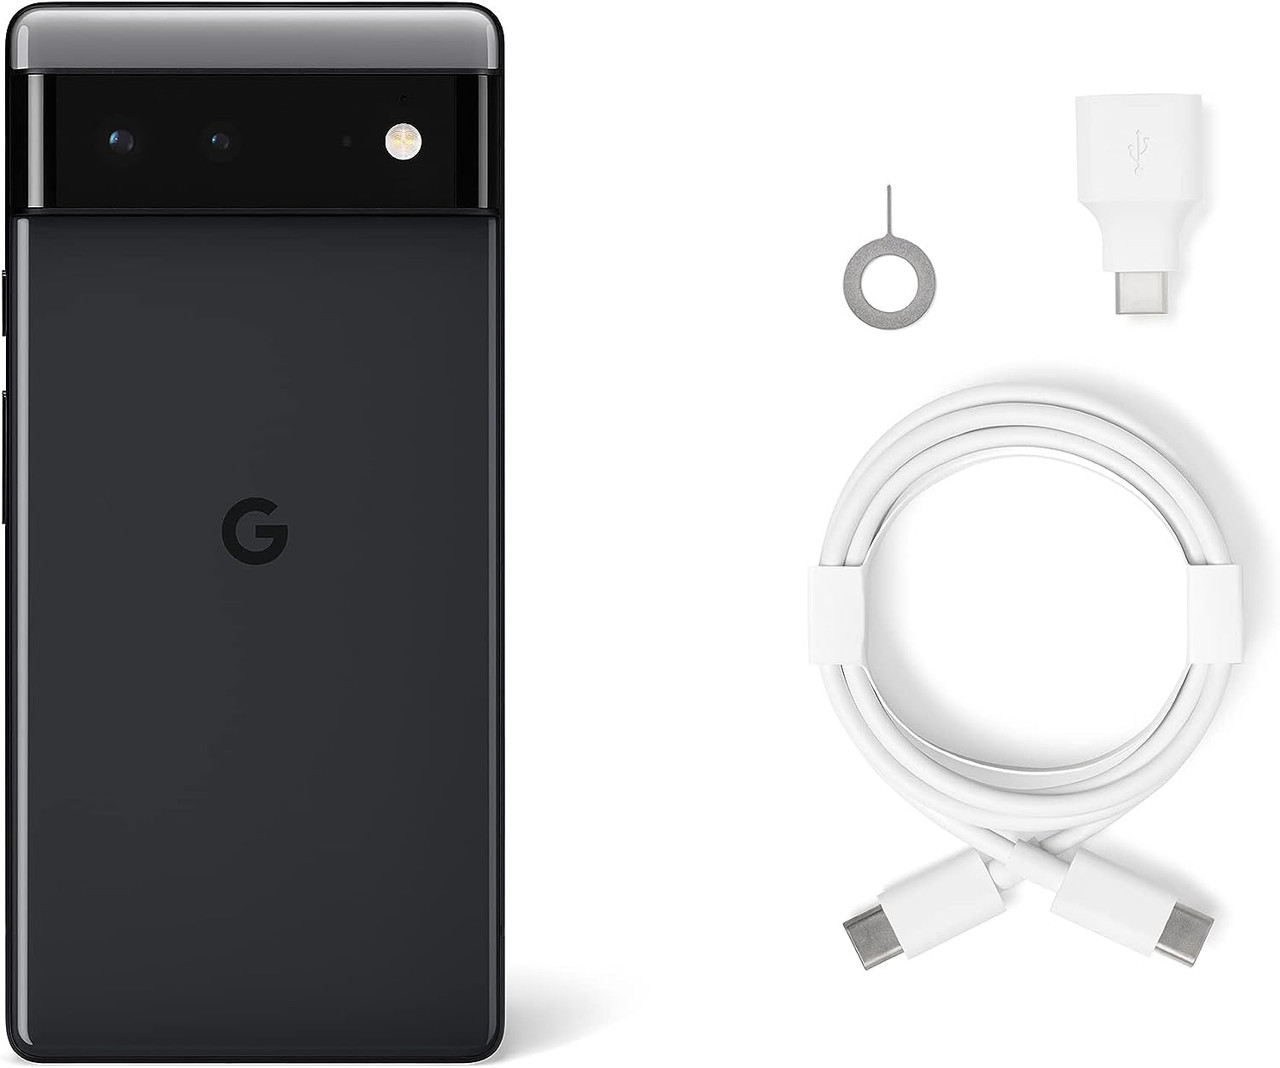 Google Pixel 6 Pro – Unlocked Android 5G smartphone with 50